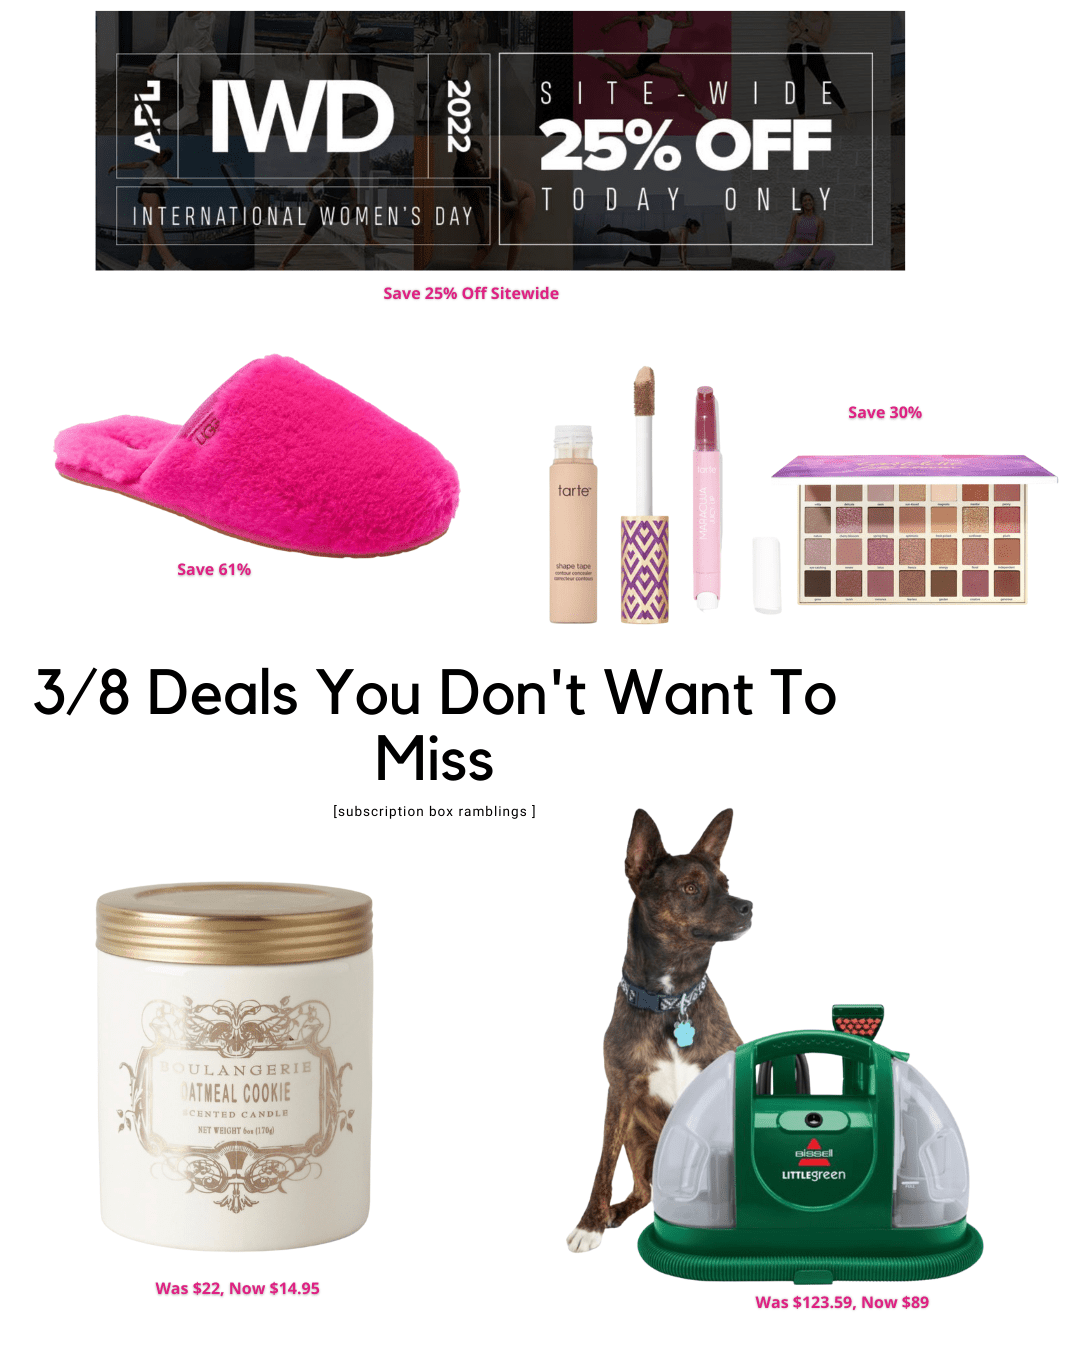 Deals You Don’t Want to Miss – 3/8